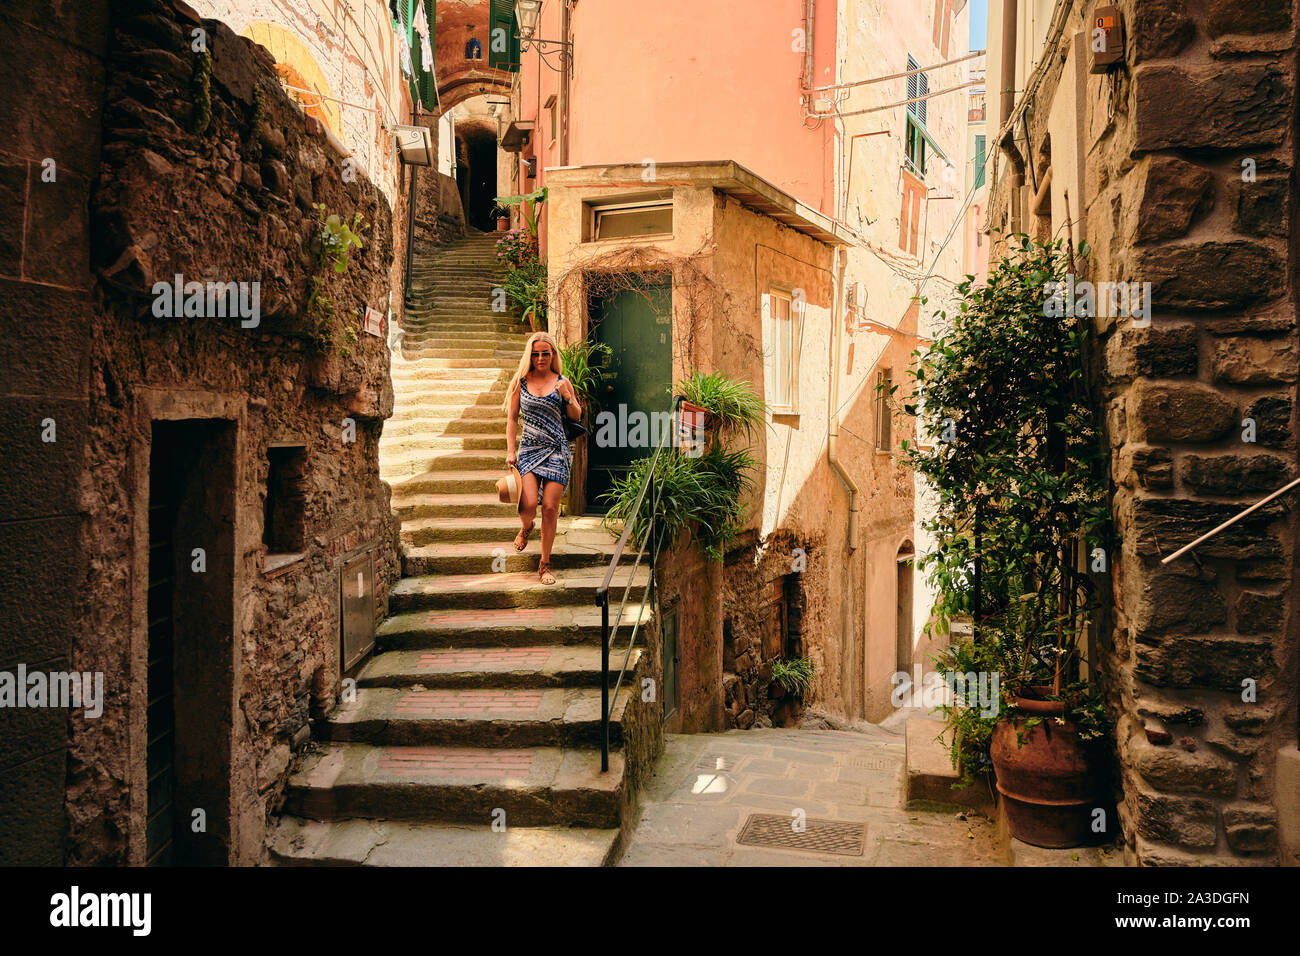 Relaxed woman in sundress and sunglasses walking along staircase down narrow sunny street at rural town Stock Photo